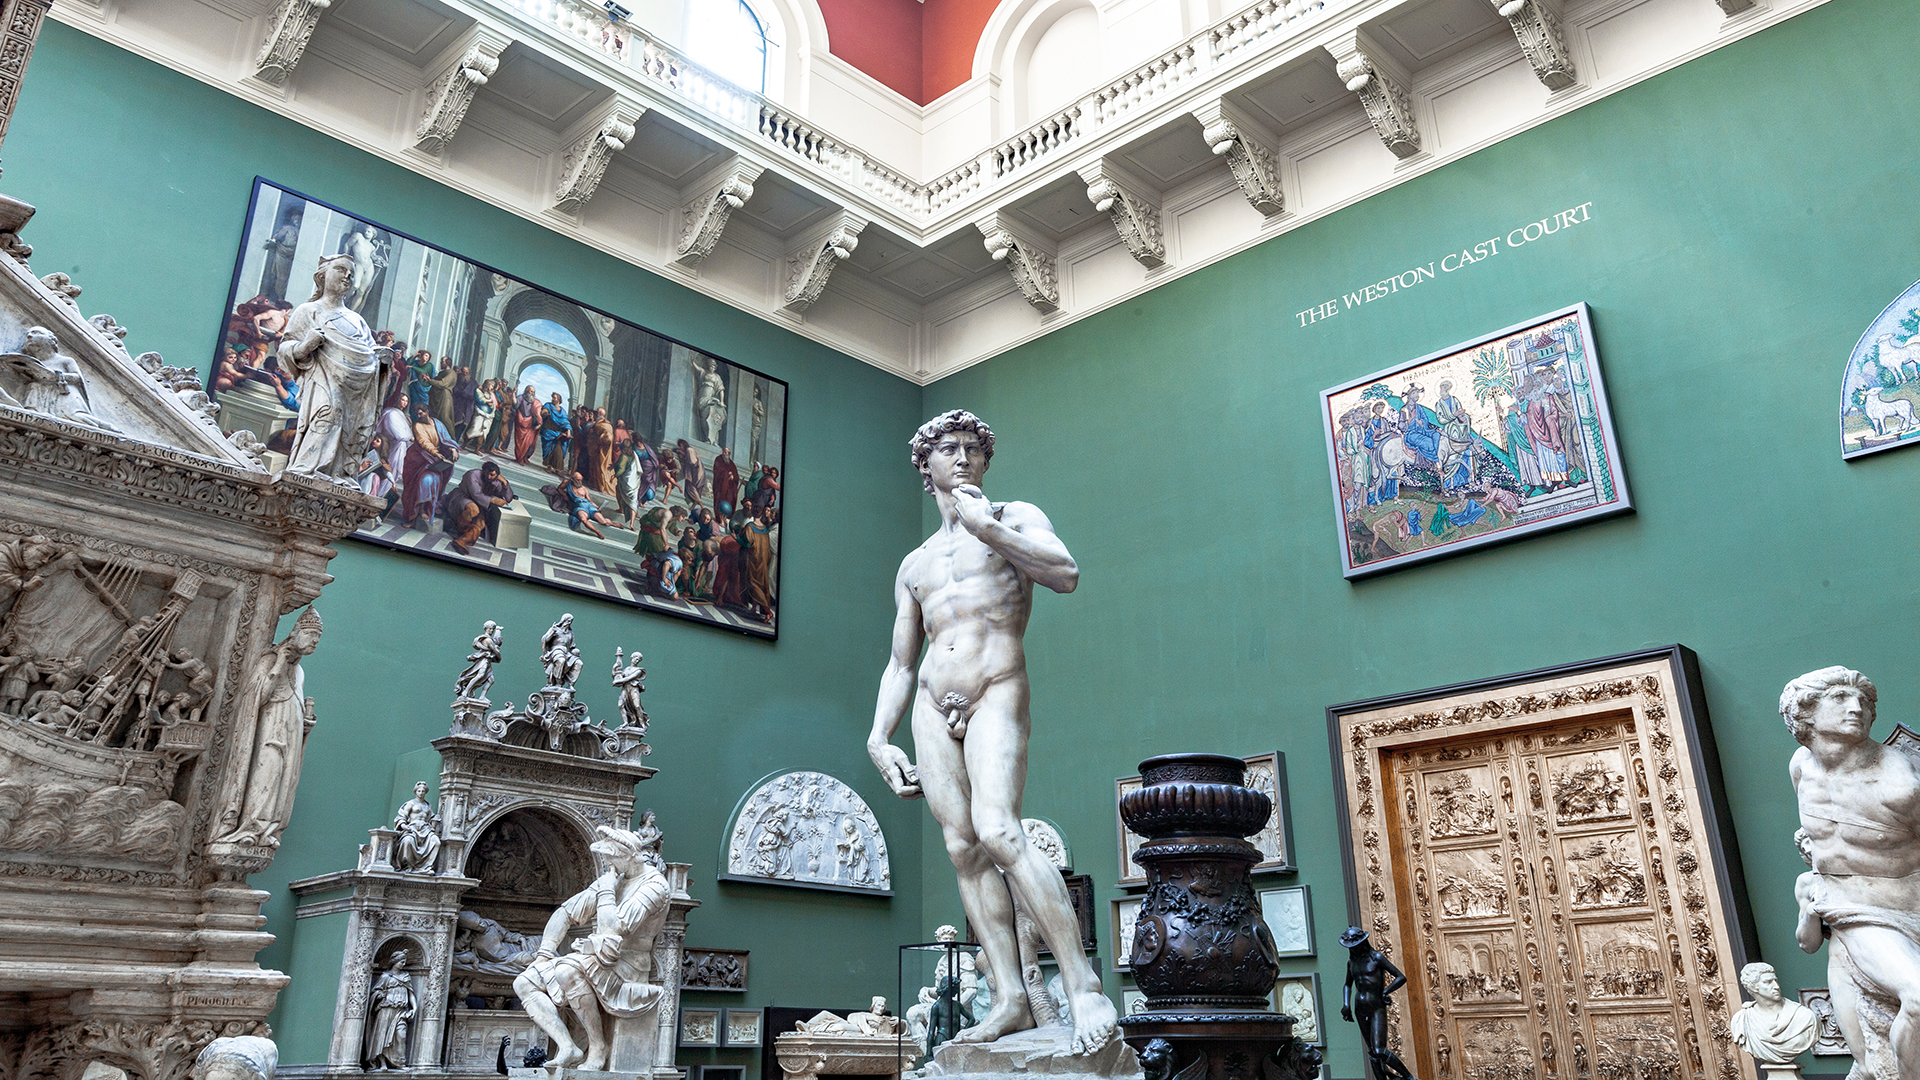 Victoria and Albert Museum - History and Facts